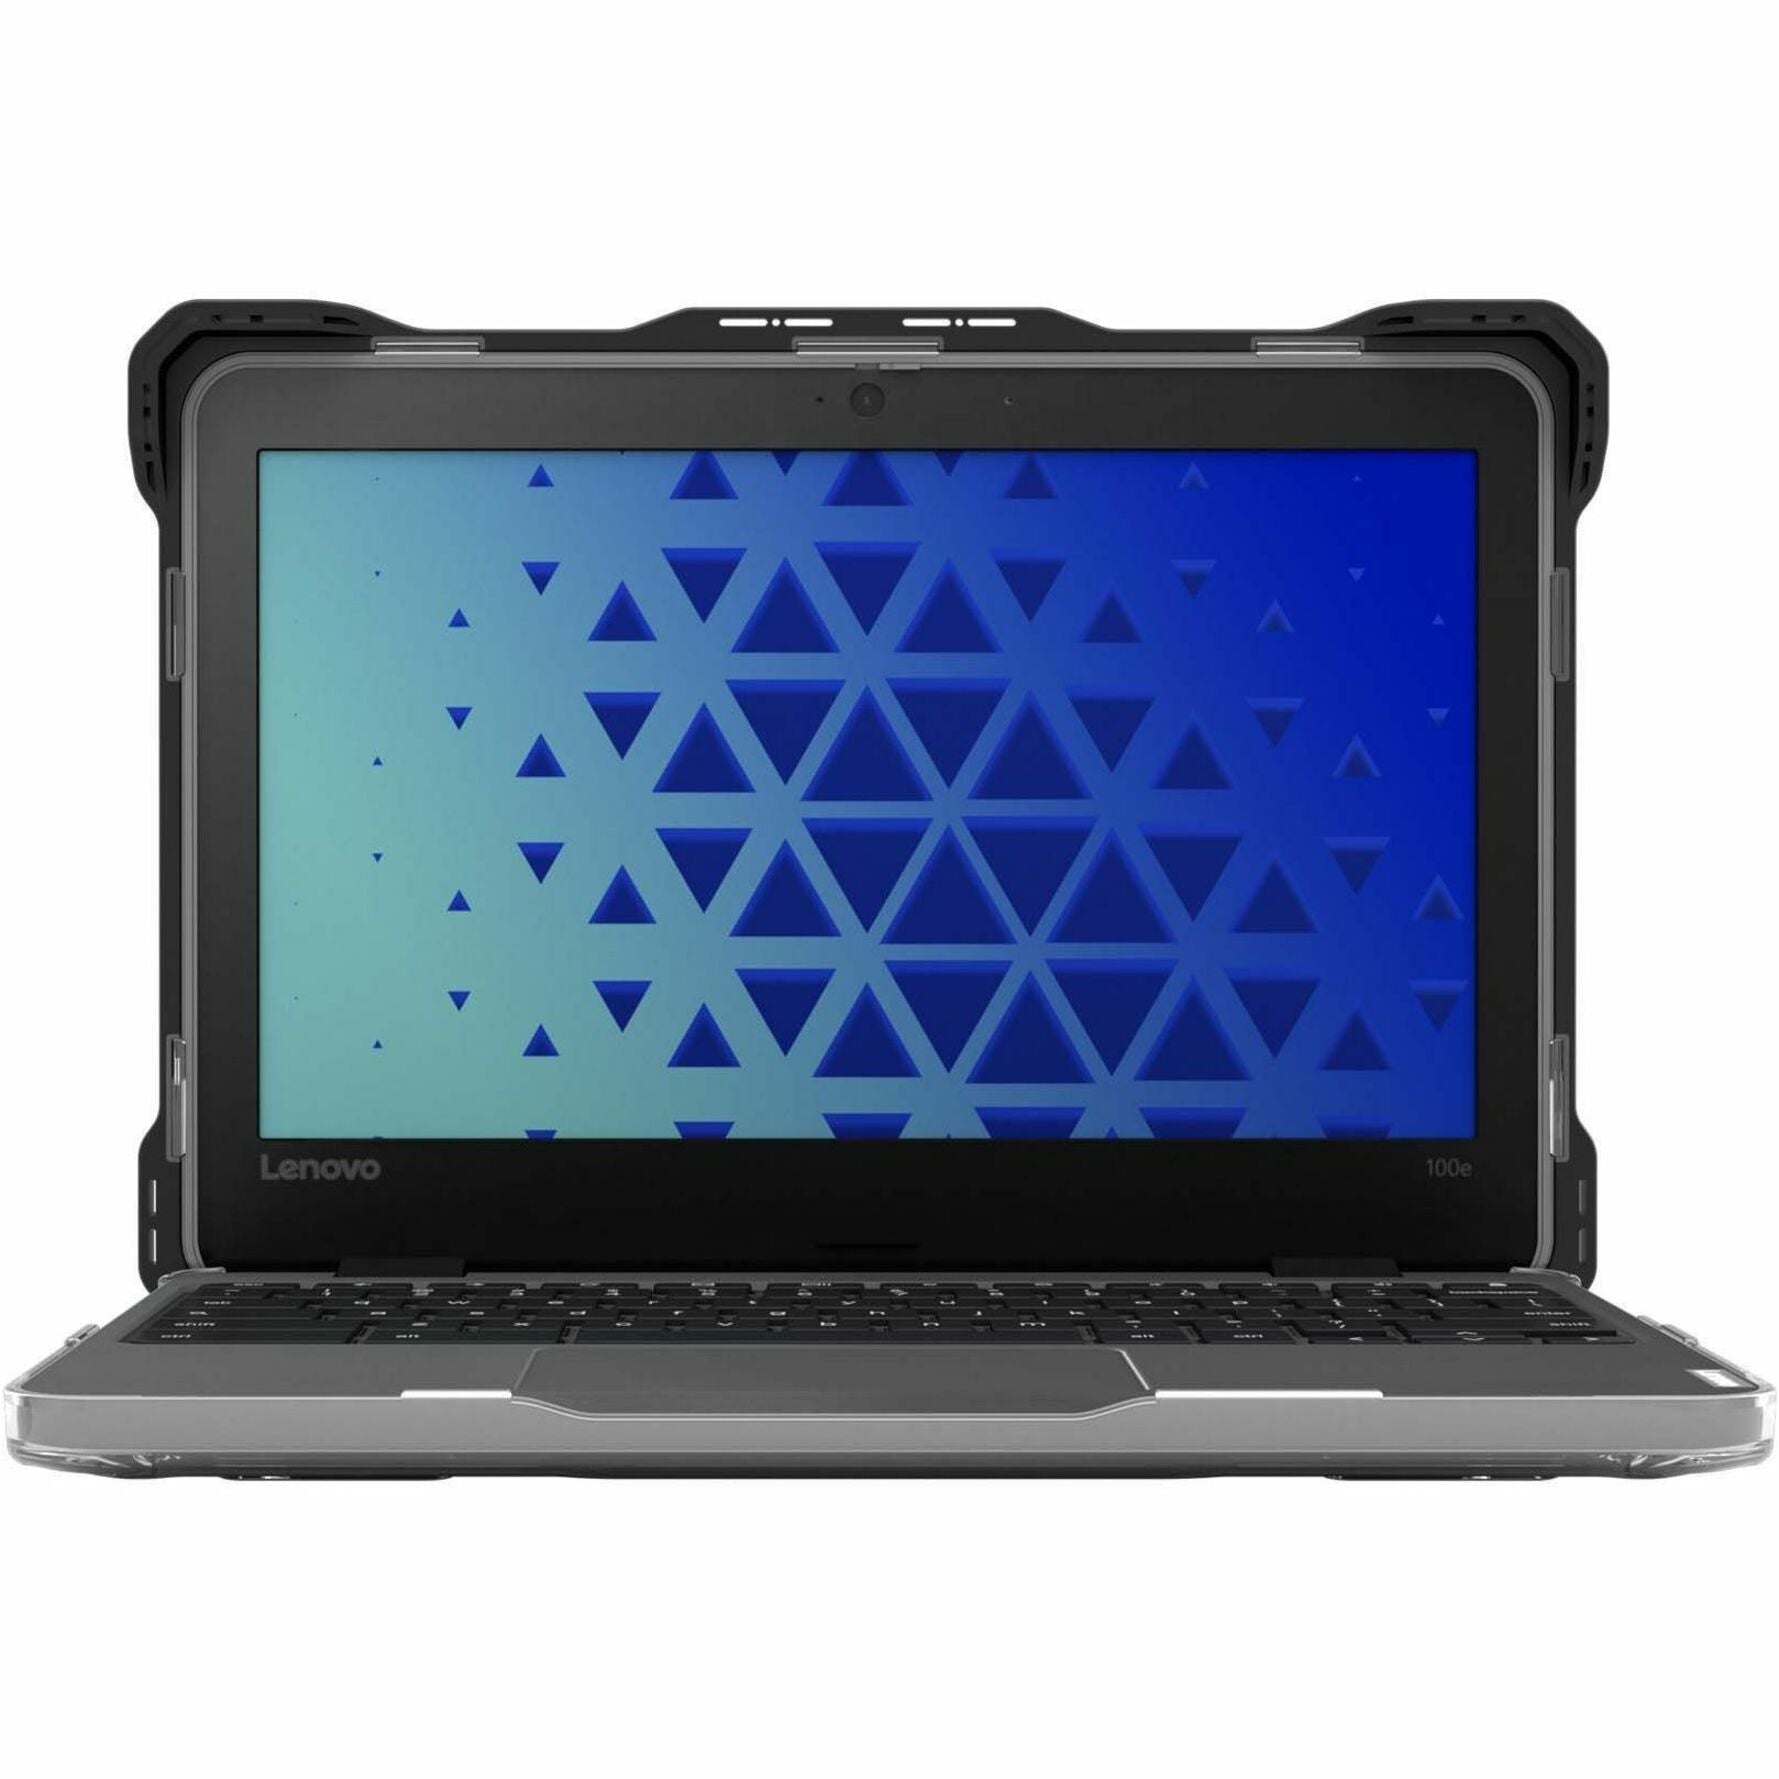 MAXCases LN-ESL-100E-G3-BCLR Extreme Shell-L for Lenovo 100e G3 Chromebook 11" Black/Clear, Rugged, Impact Resistant, Textured Grip